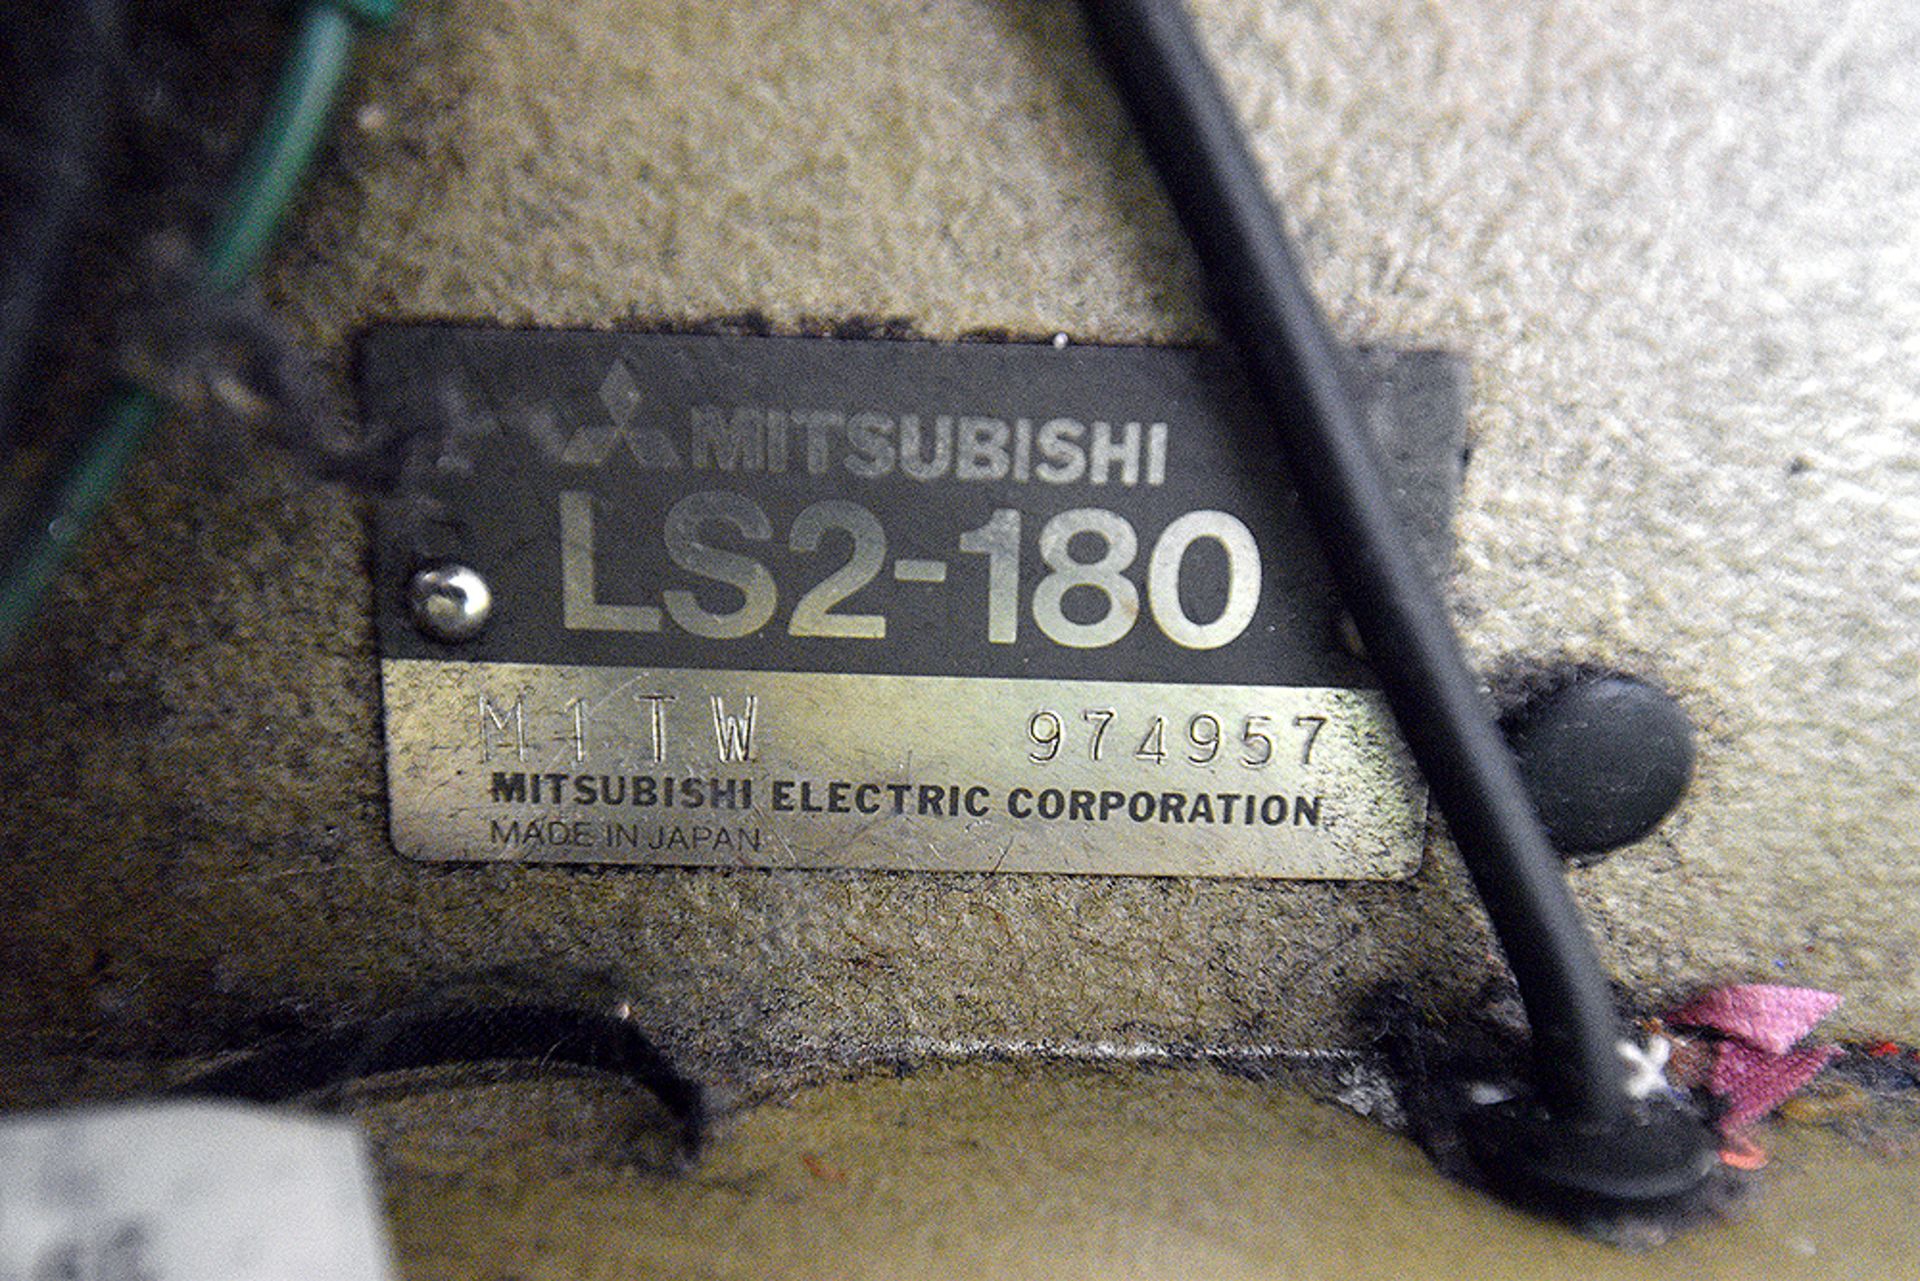 Mitsubishi LS2-180 w/ Limistop Z and Foot Pedal - Image 2 of 7